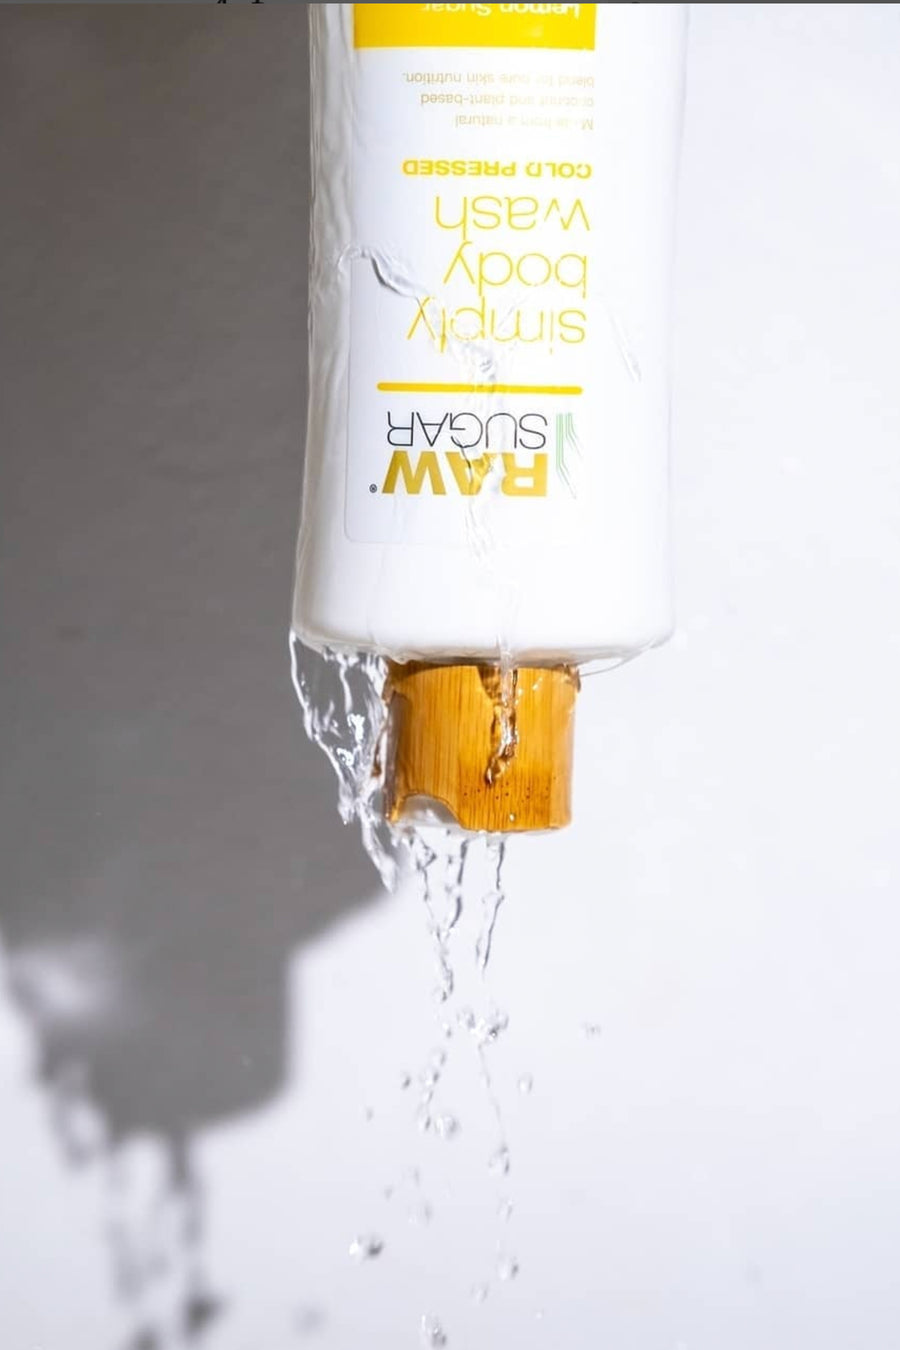 Upside down body wash with water falling